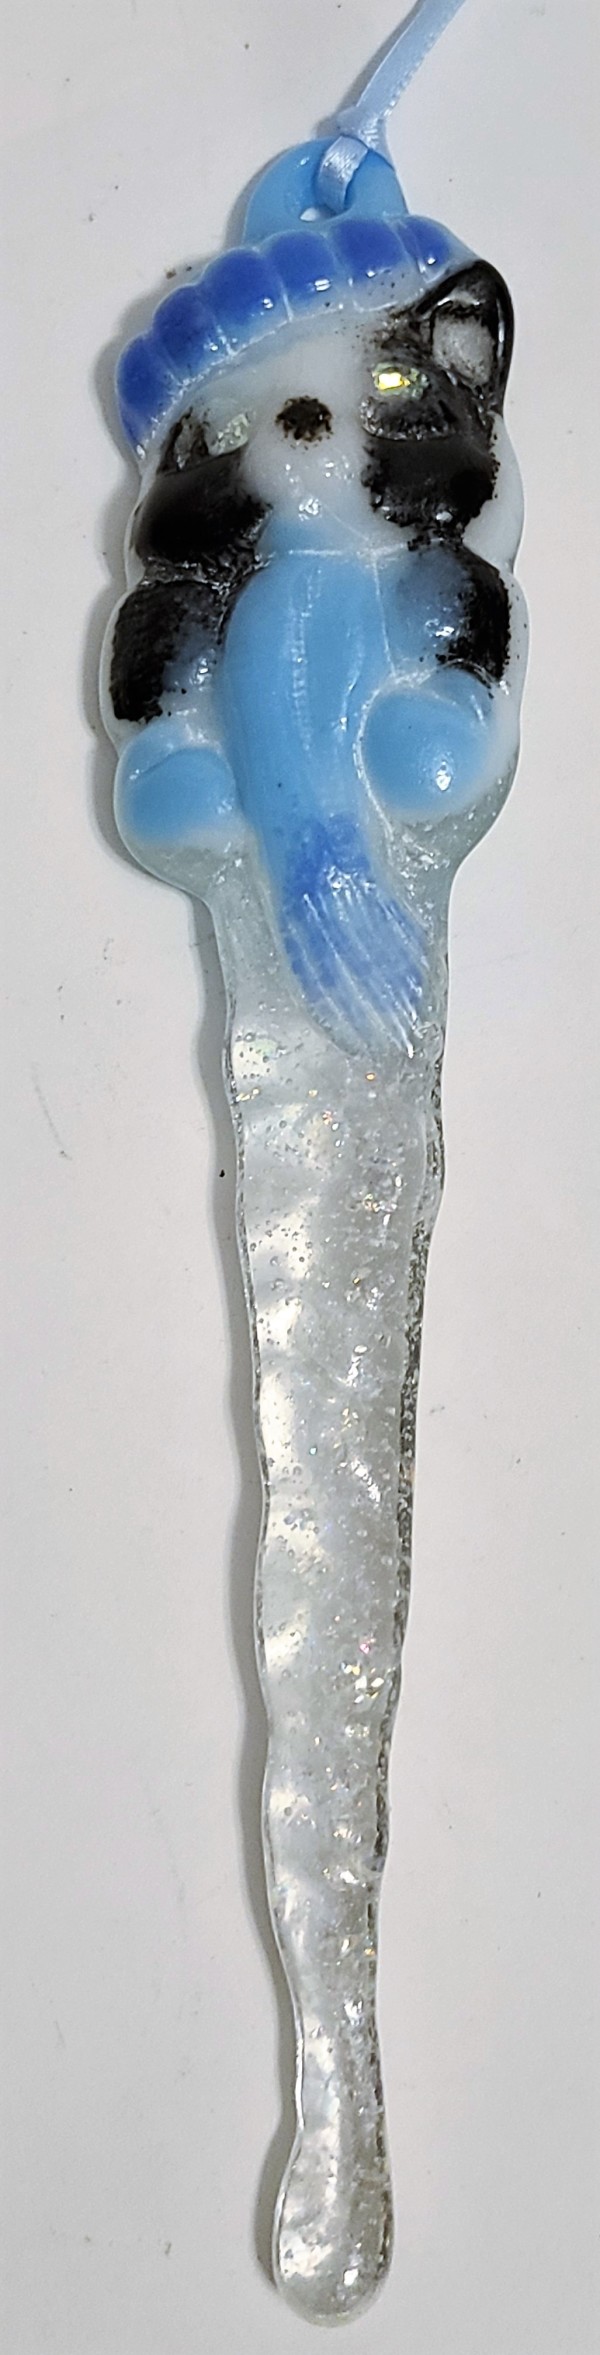 Cat Icicle Ornament by Kathy Kollenburn